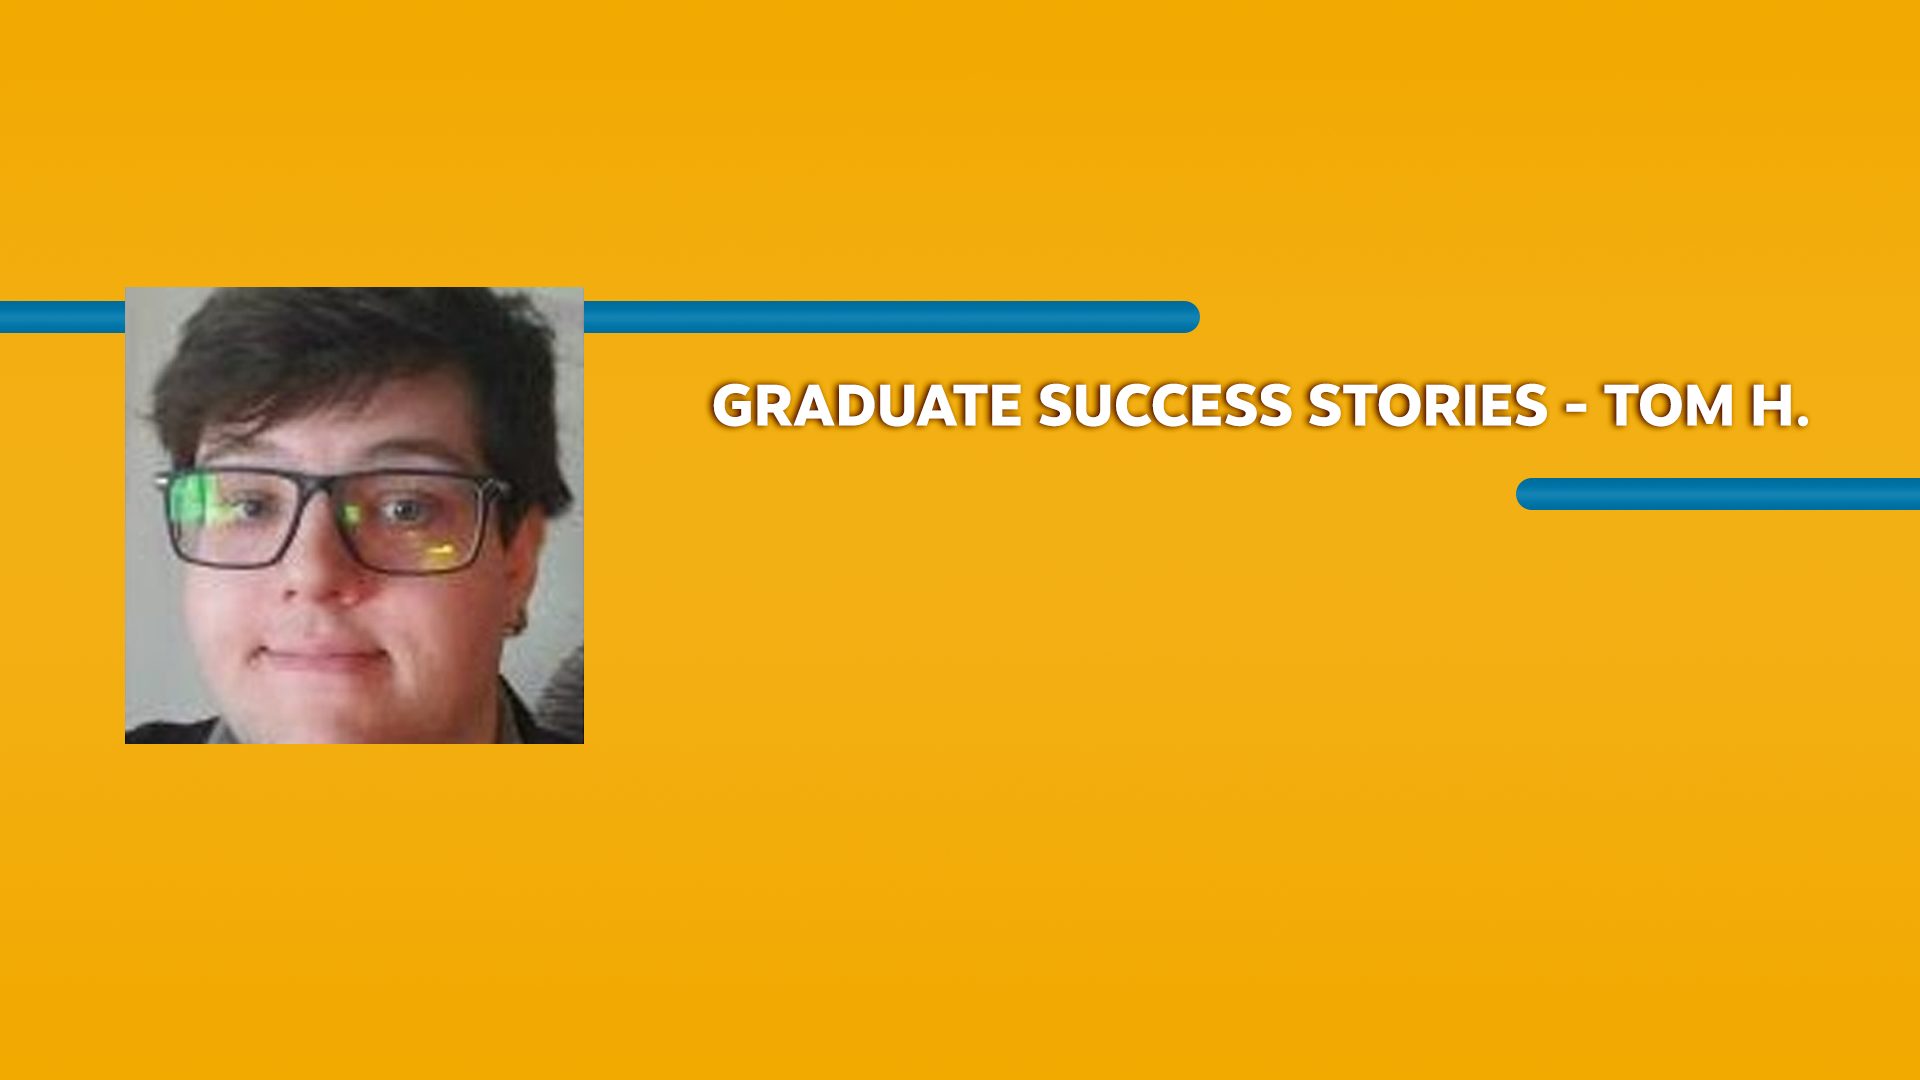 Orange rectangle with a picture of a man and Graduate Success Stories - Tom H. text in white font